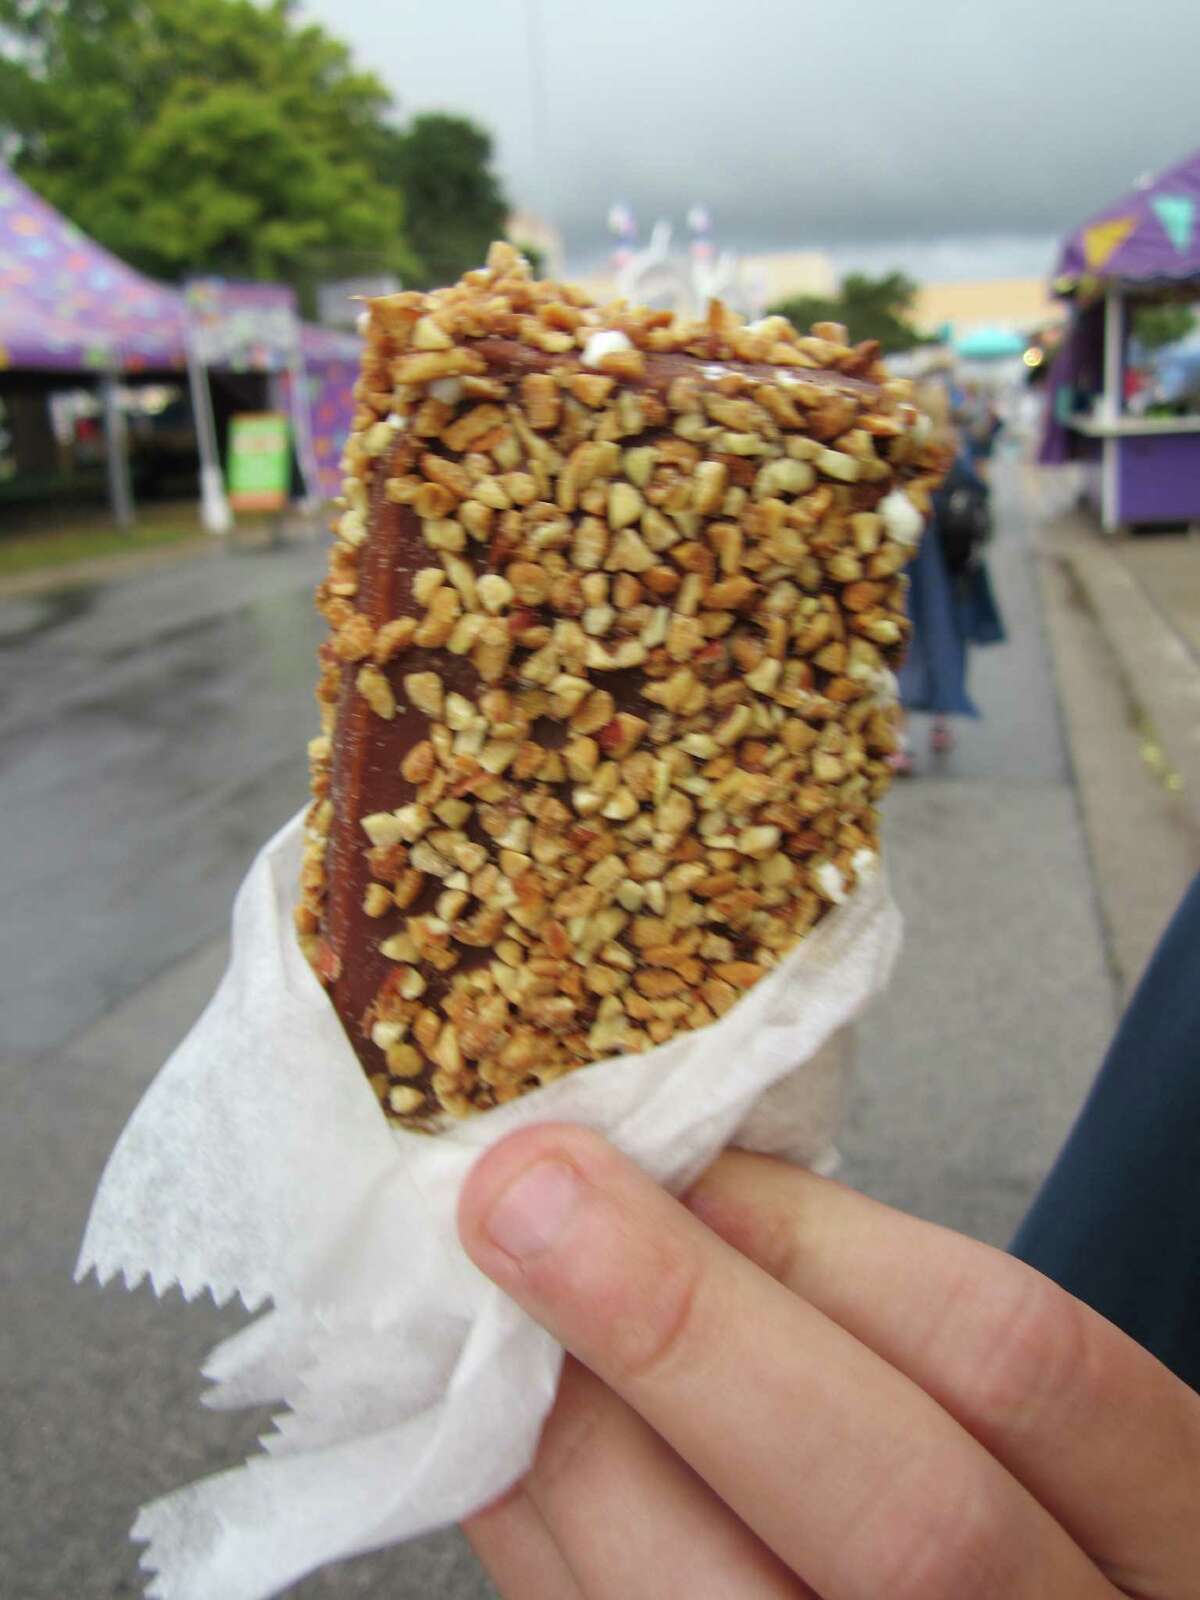 State Fair of Texas attendees beat the heat with a peanut-covered, chocolate-dipped ice cream bar.